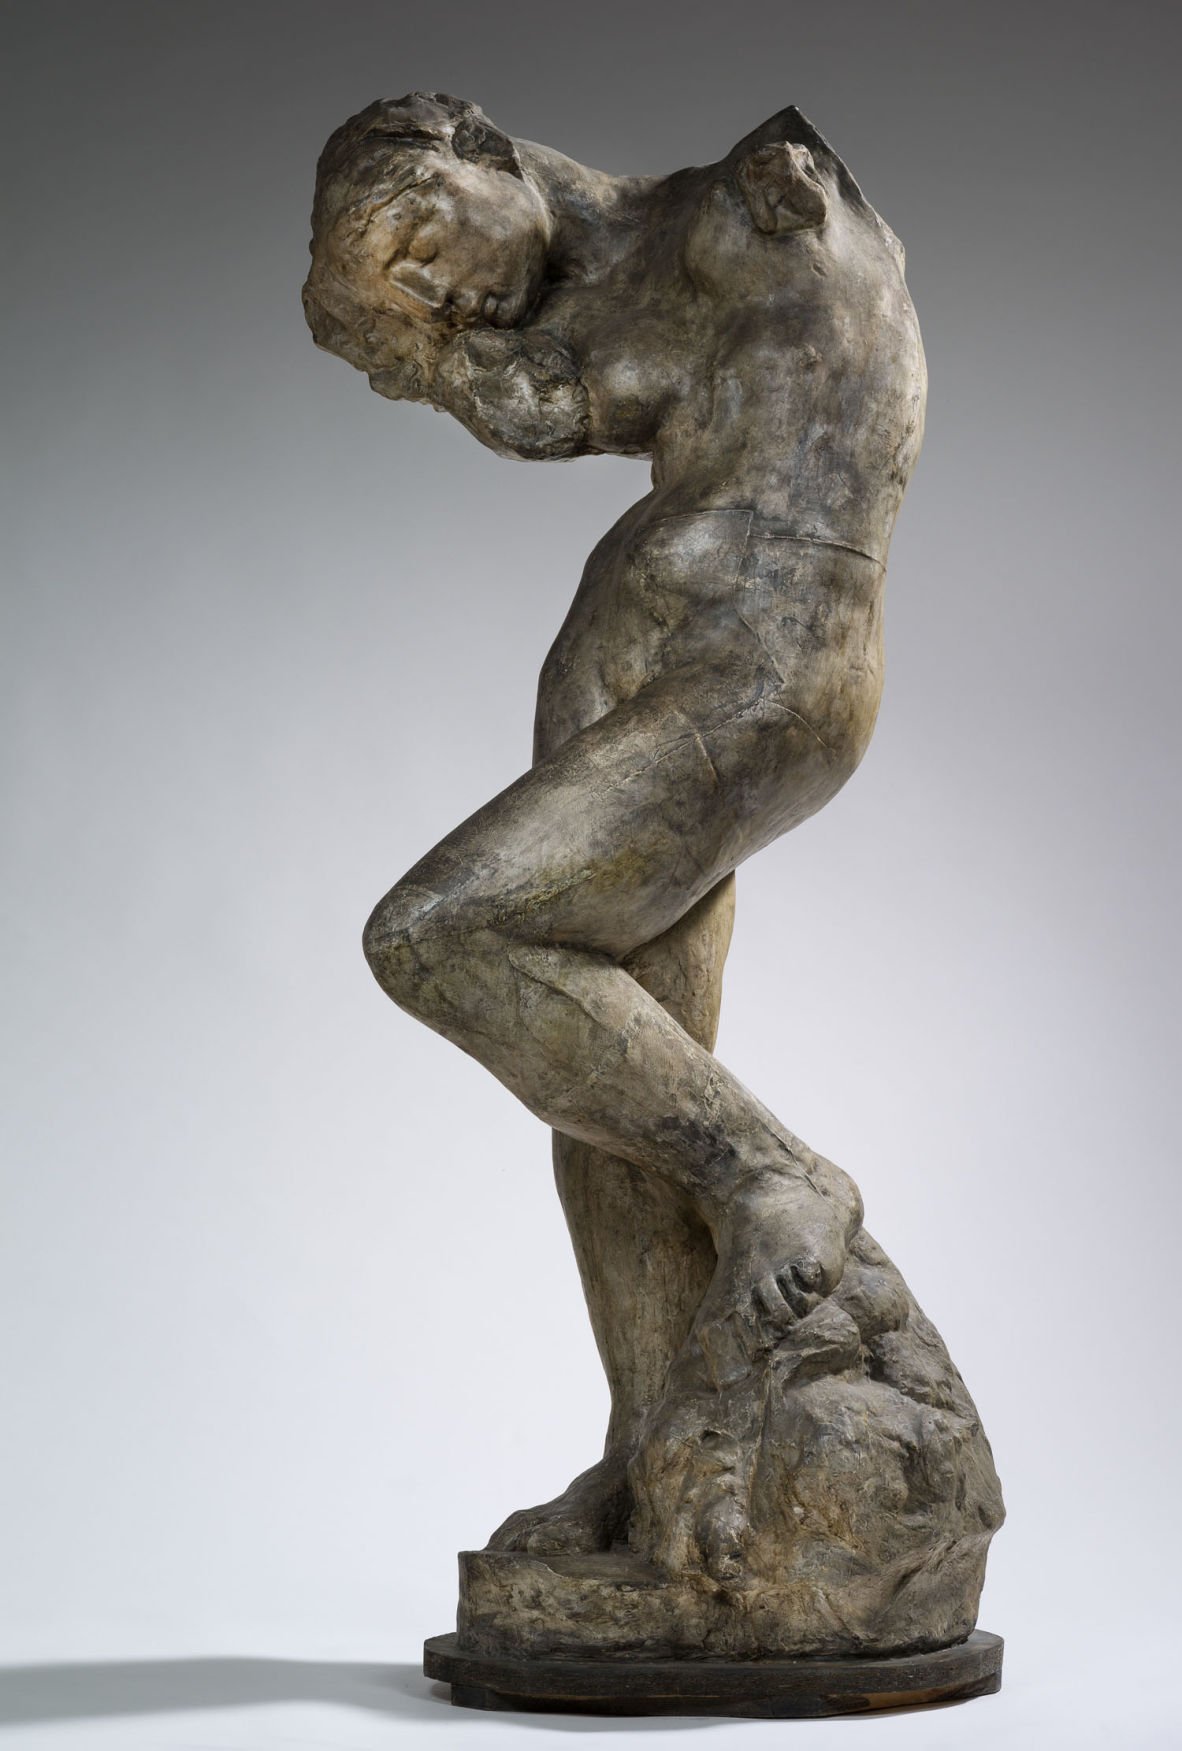 Exhibits of works by Rodin and Peter Max highlight visual arts season